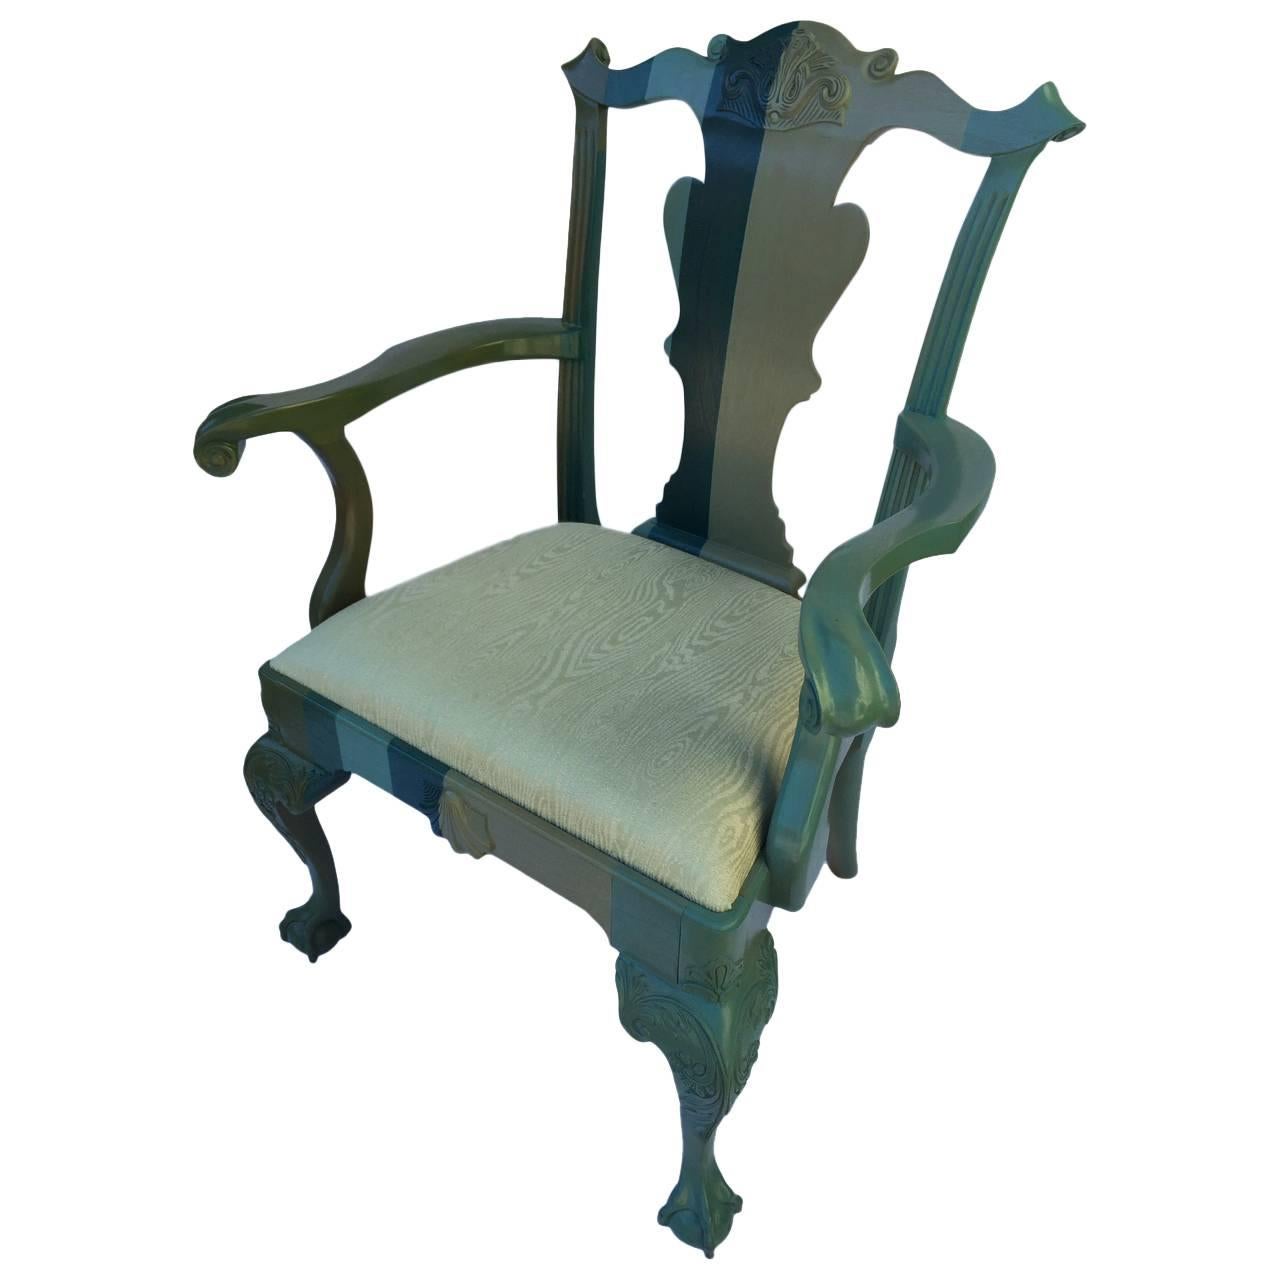 Hand Decorated Chippendale Style Chair by Jamie Drake